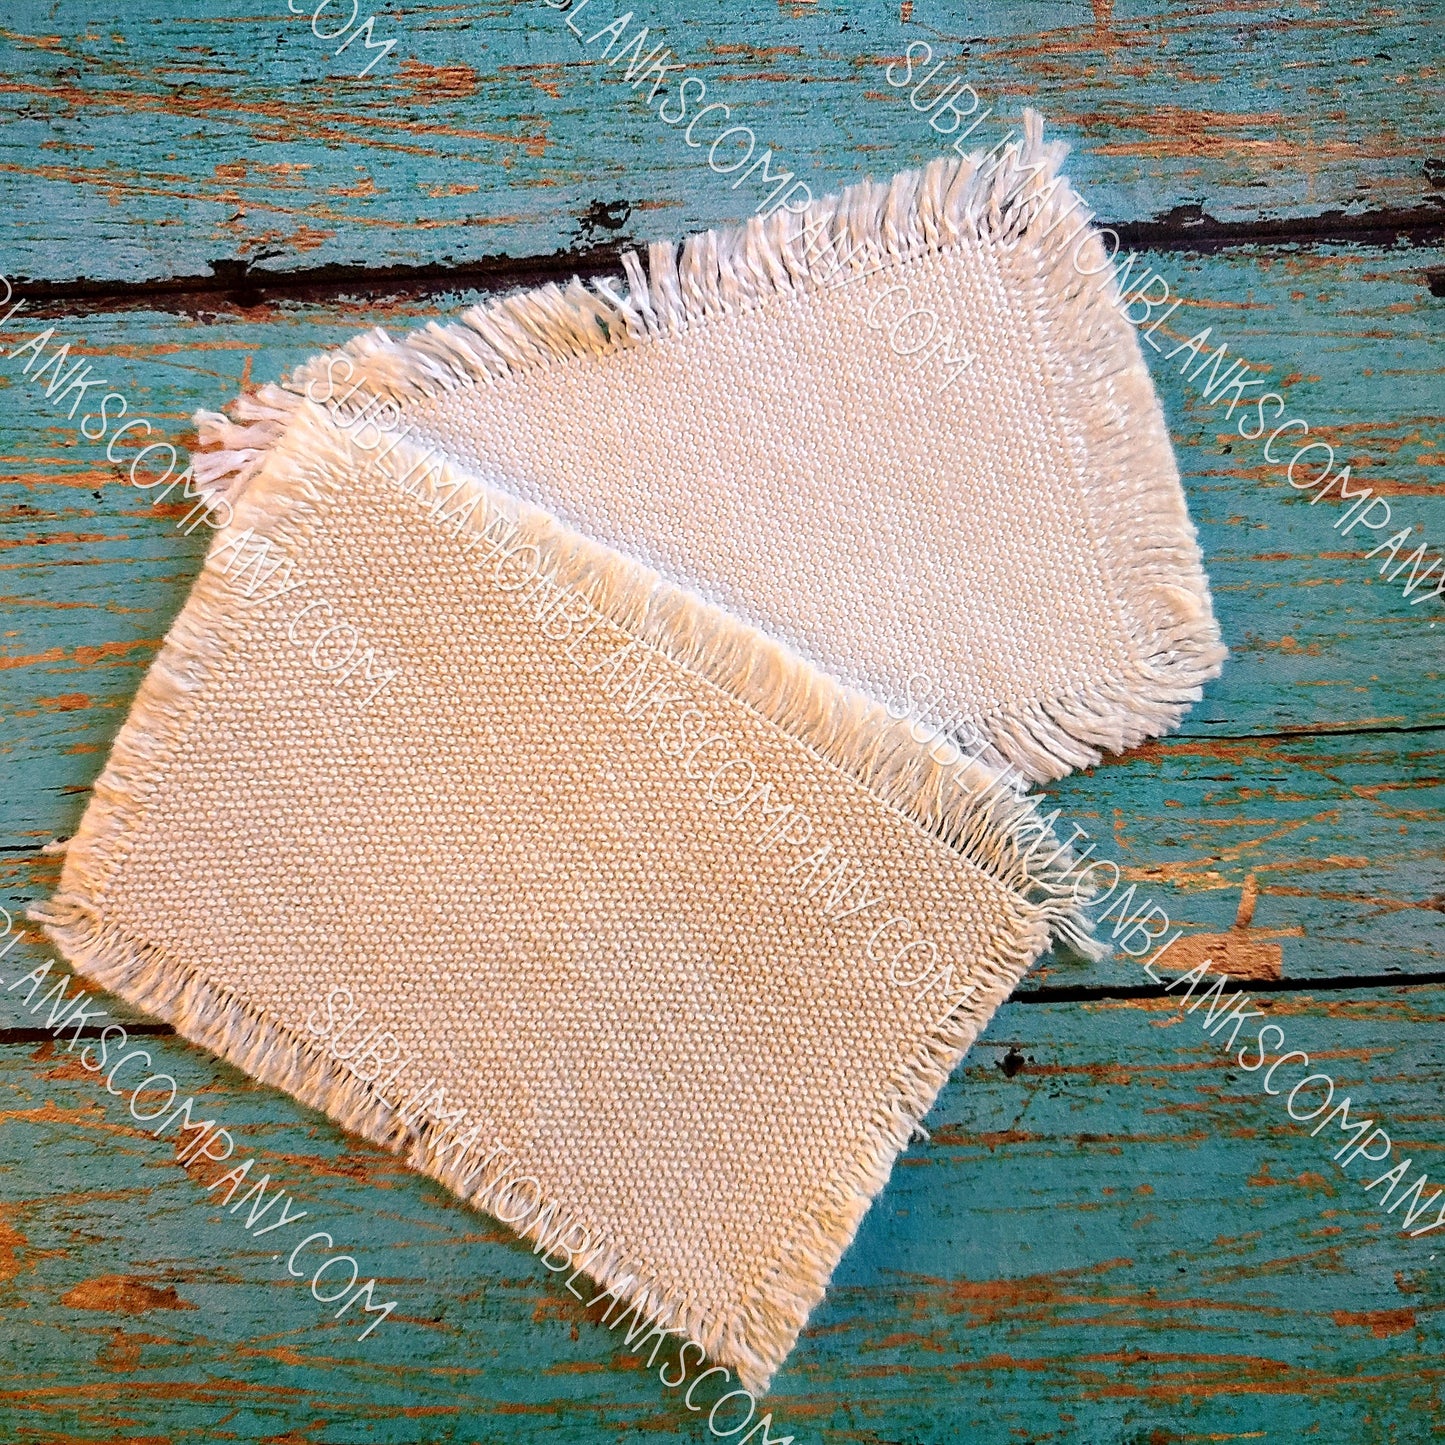 Distressed Burlap Rectangle Hat Patch Sublimation Blank with Glue Paper. Raggy